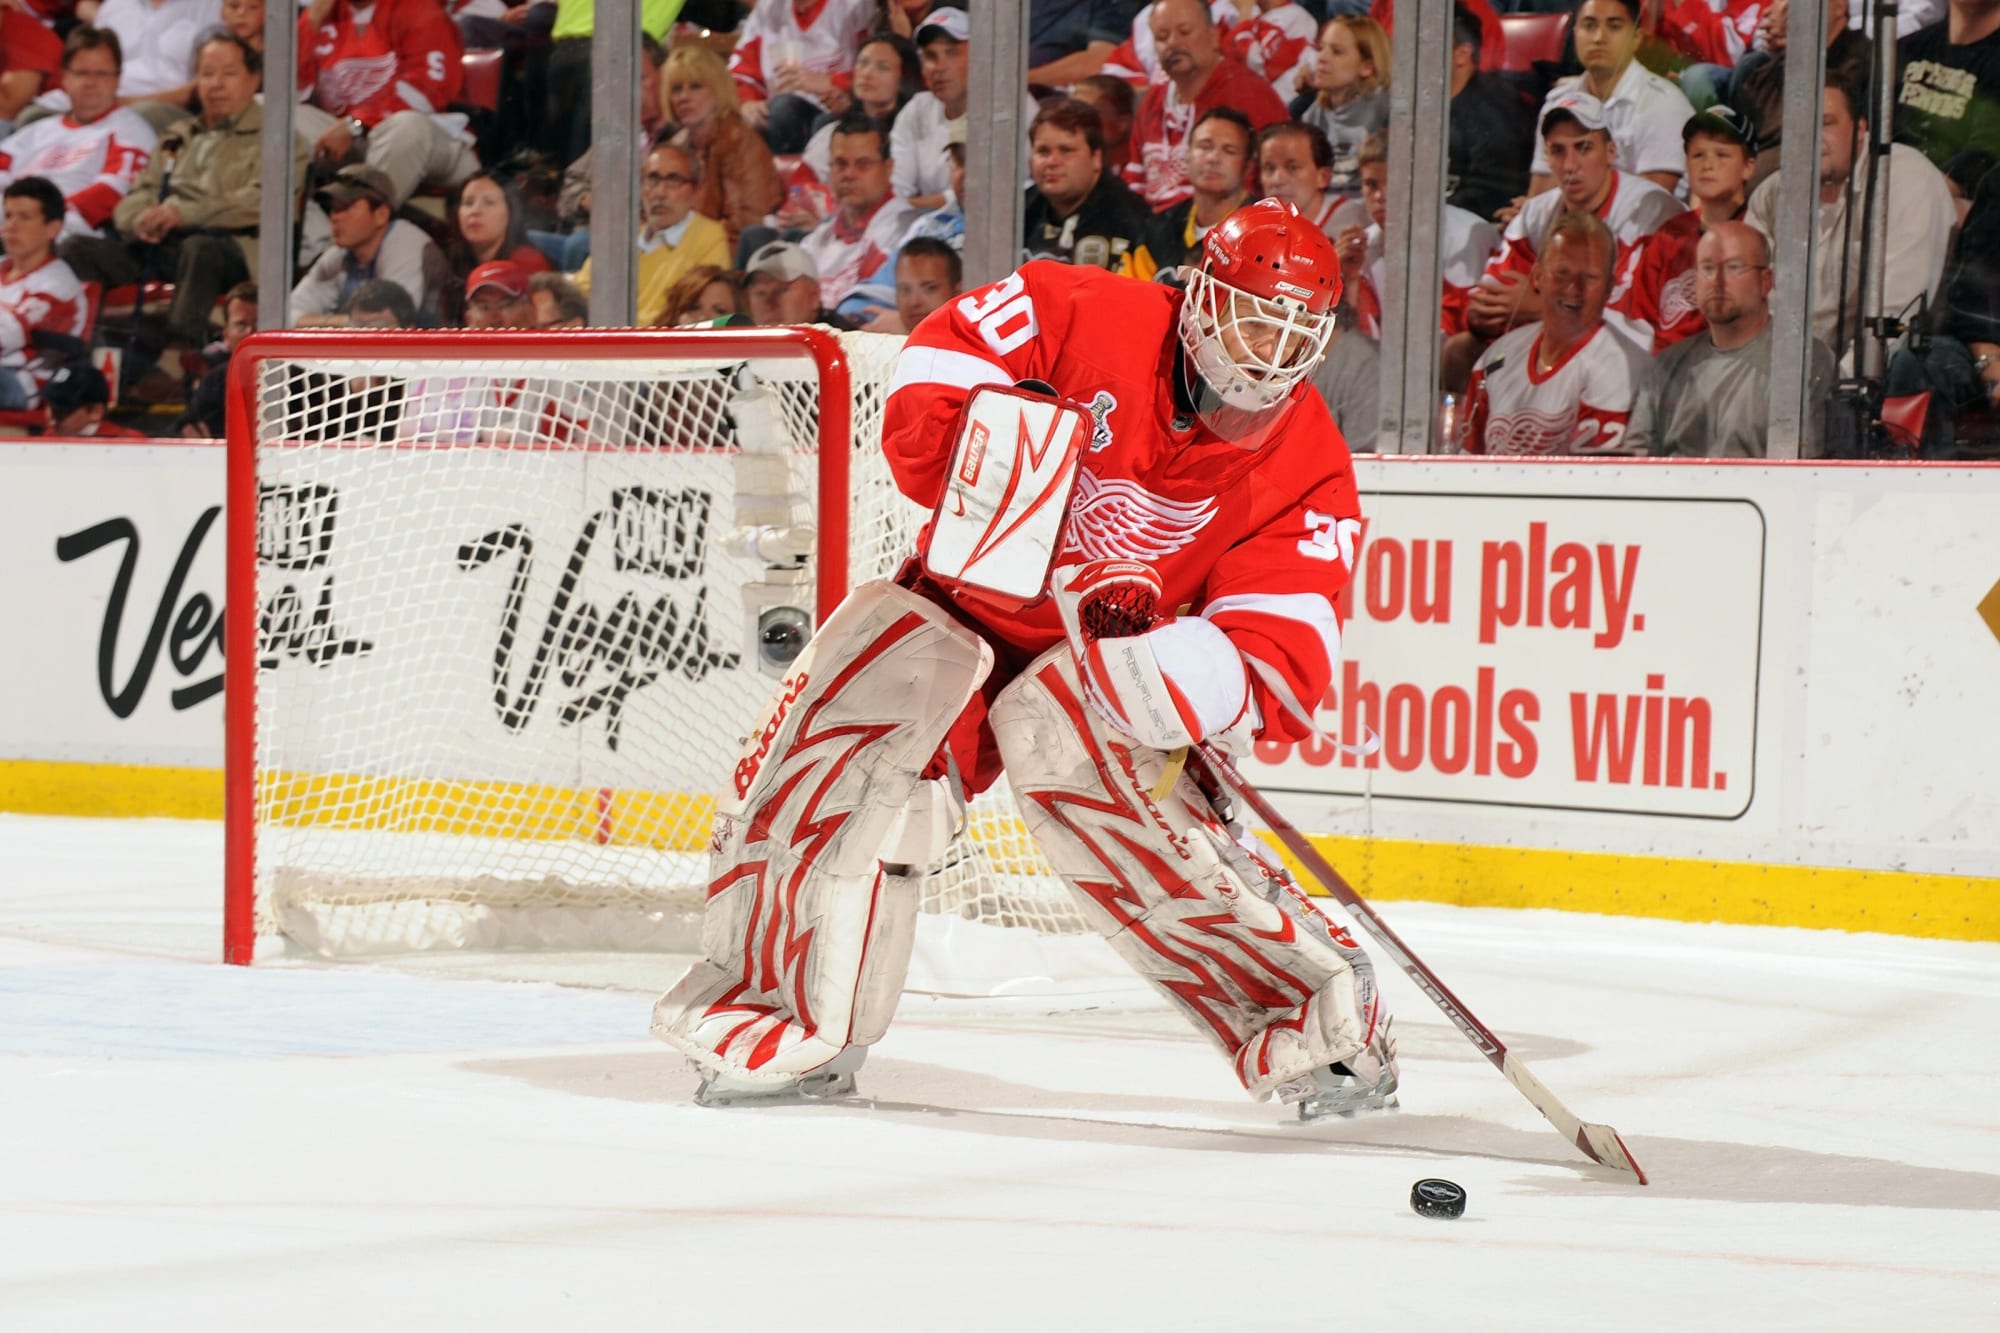 Chris Osgood Ultimate Highlights: NHL's Most Underrated Goalie